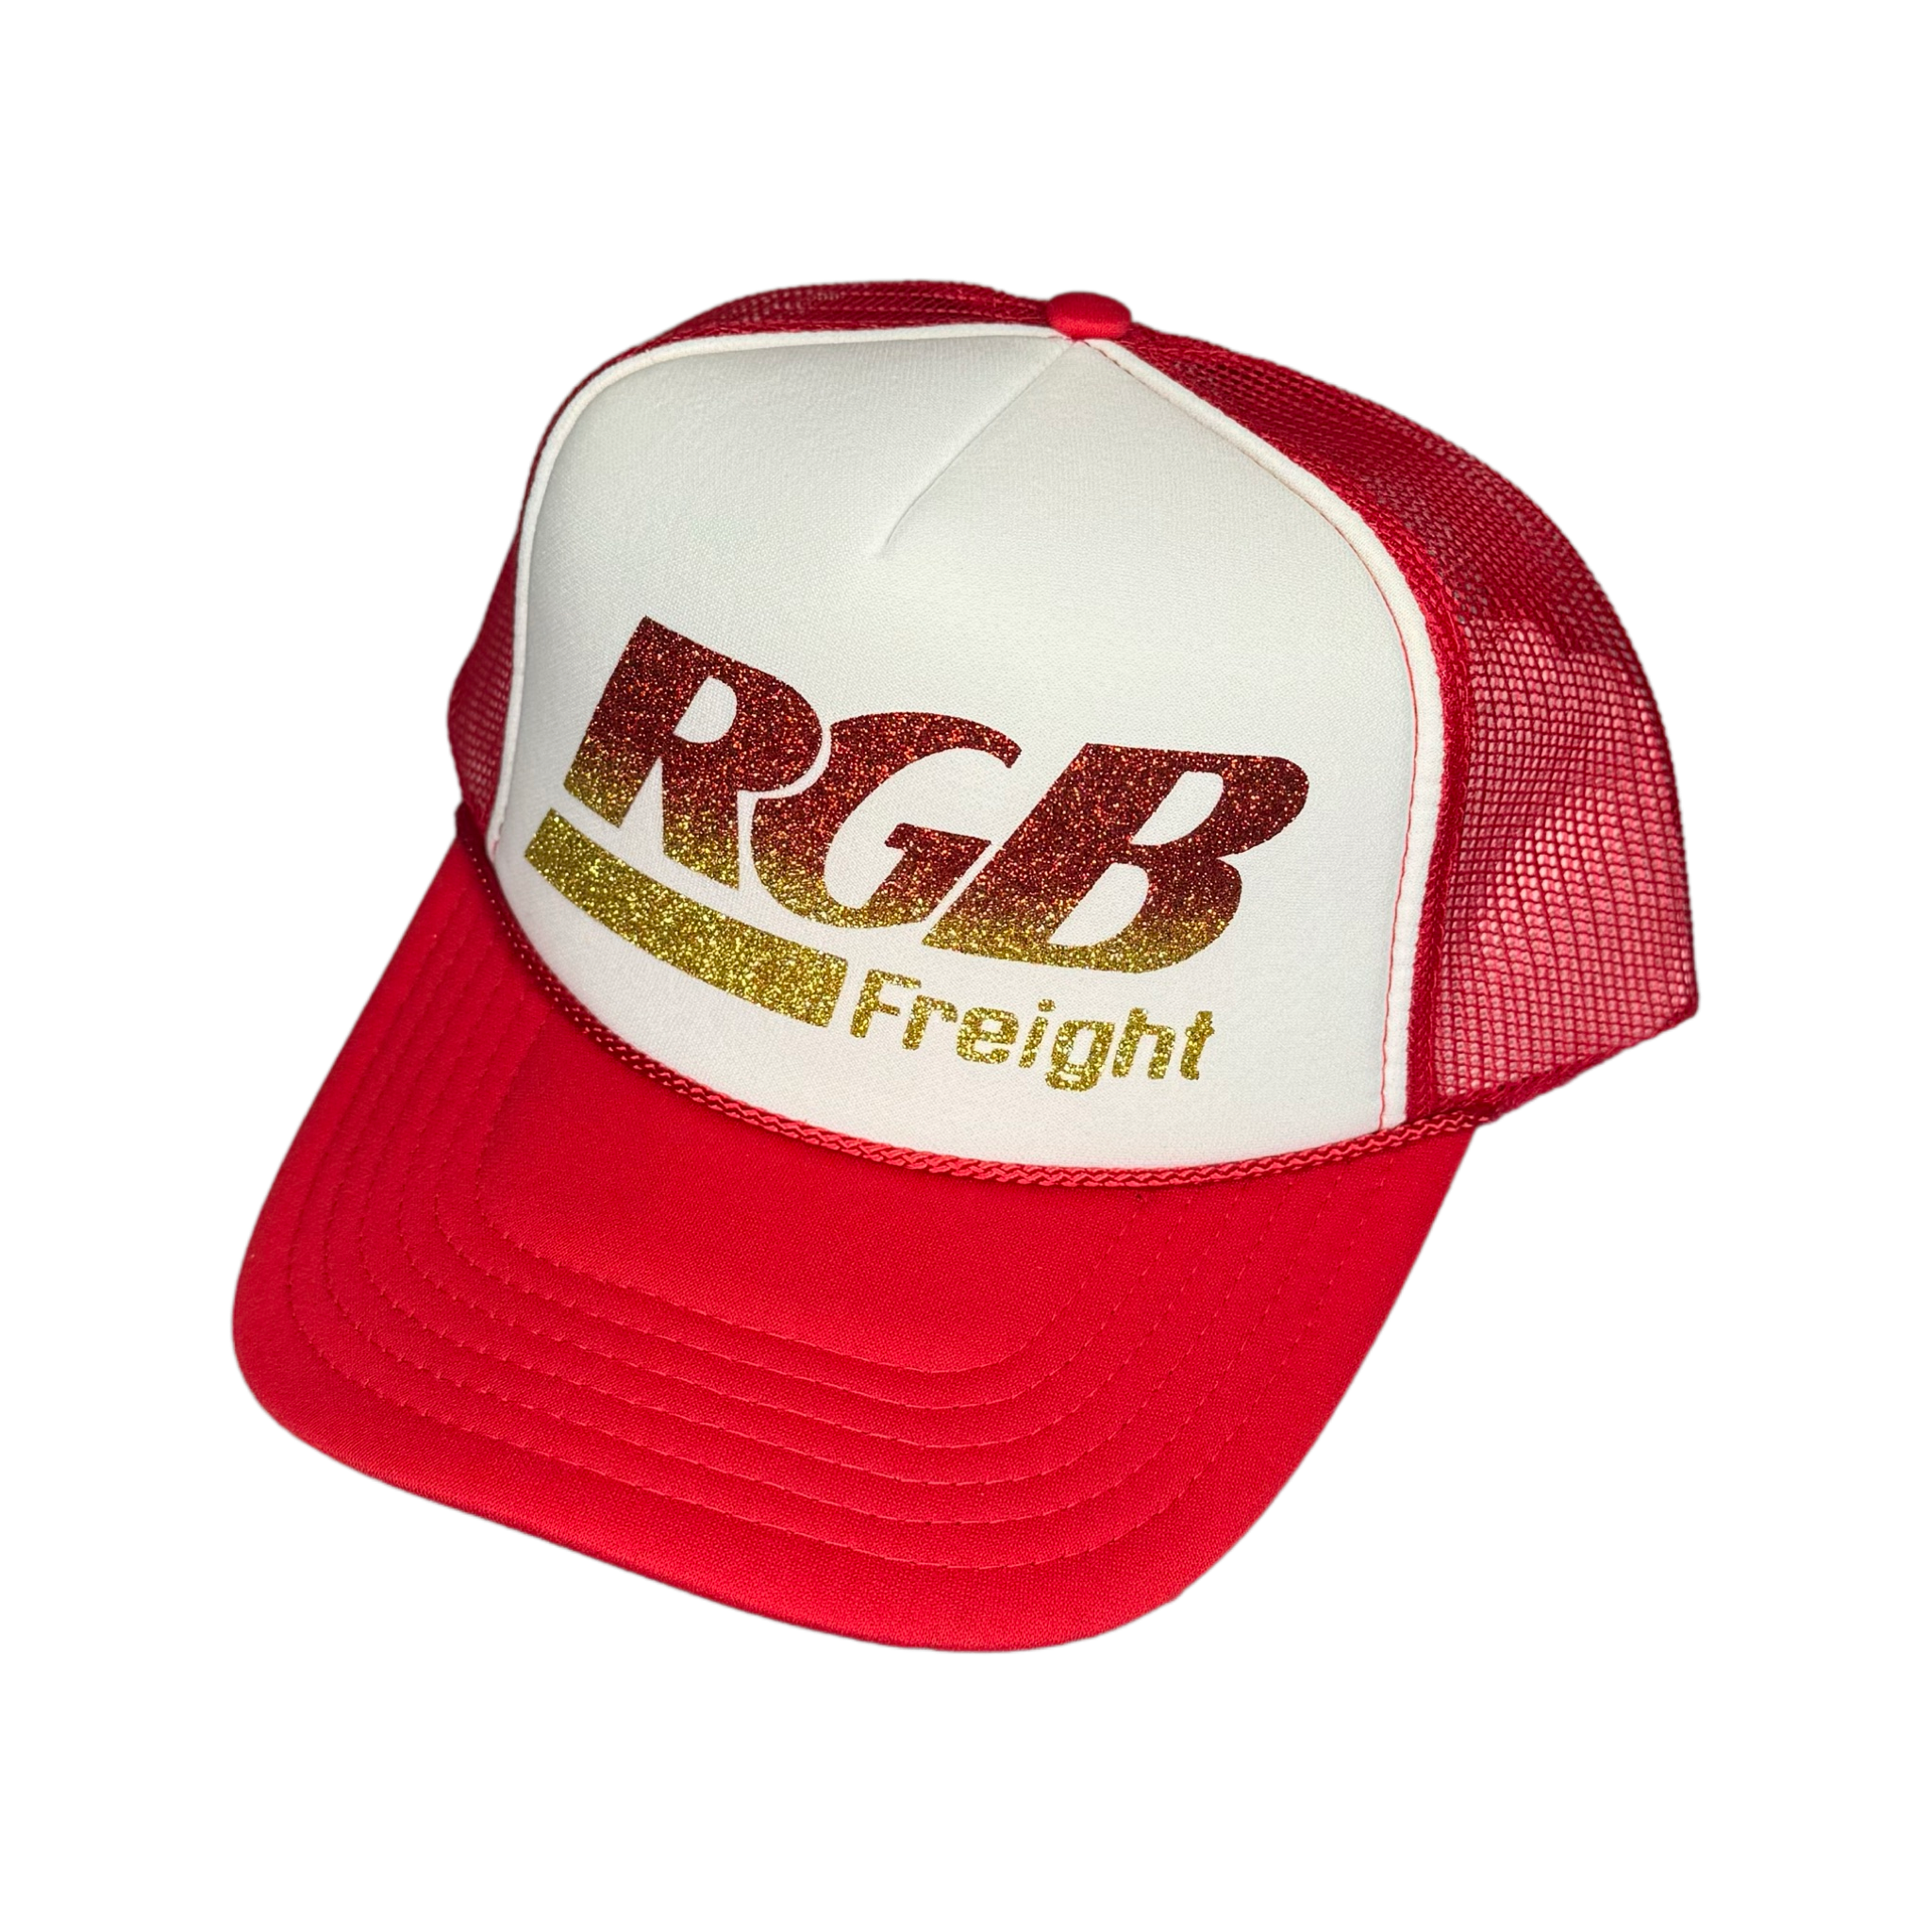 RGB FREIGHT TRUCKER HAT - “ICEE COLORS”